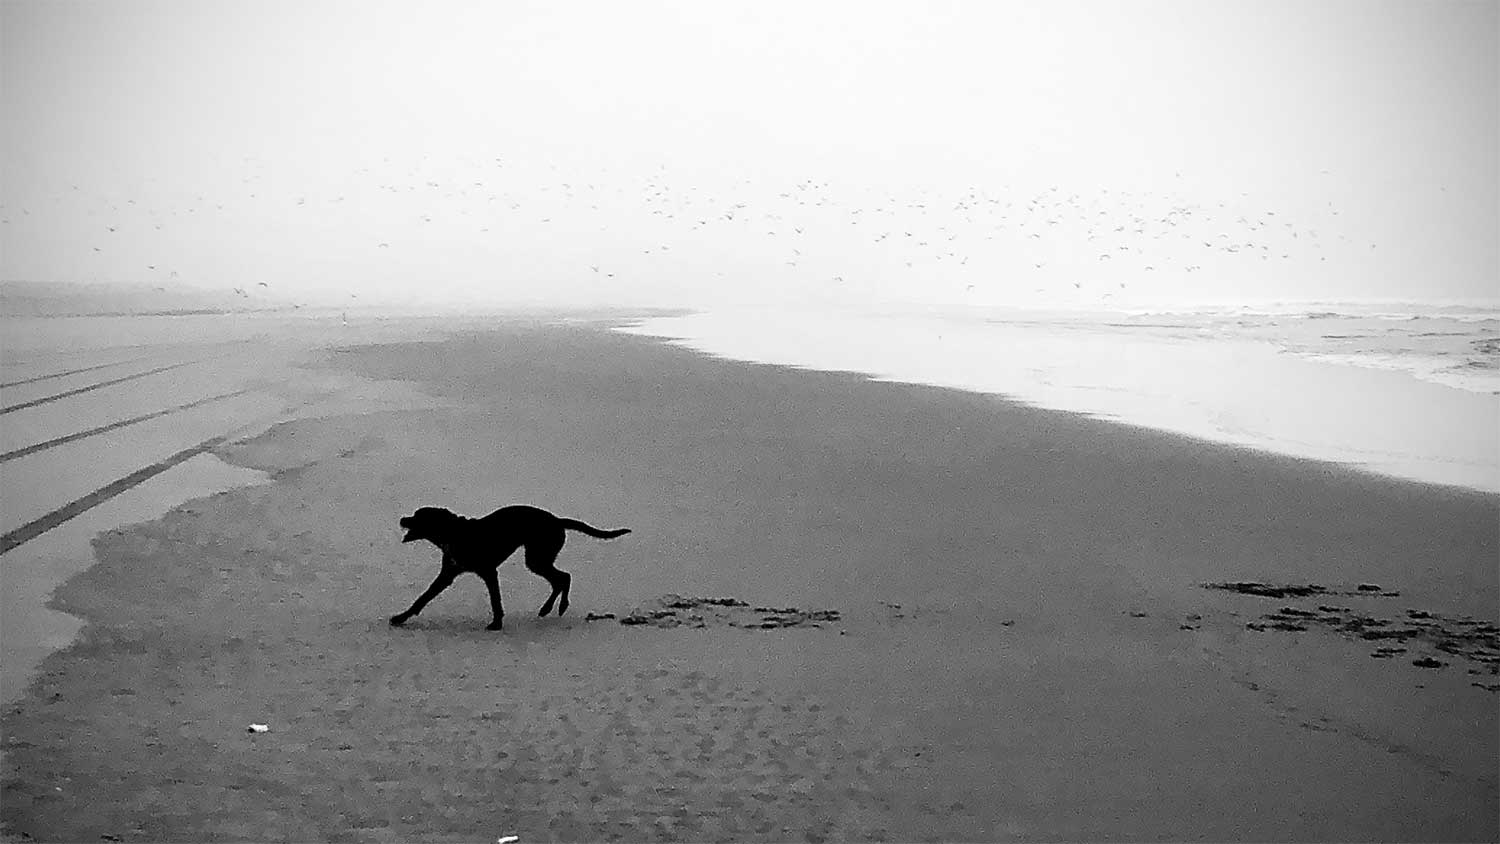 A black dog on a foggy beach barks at something out of frame